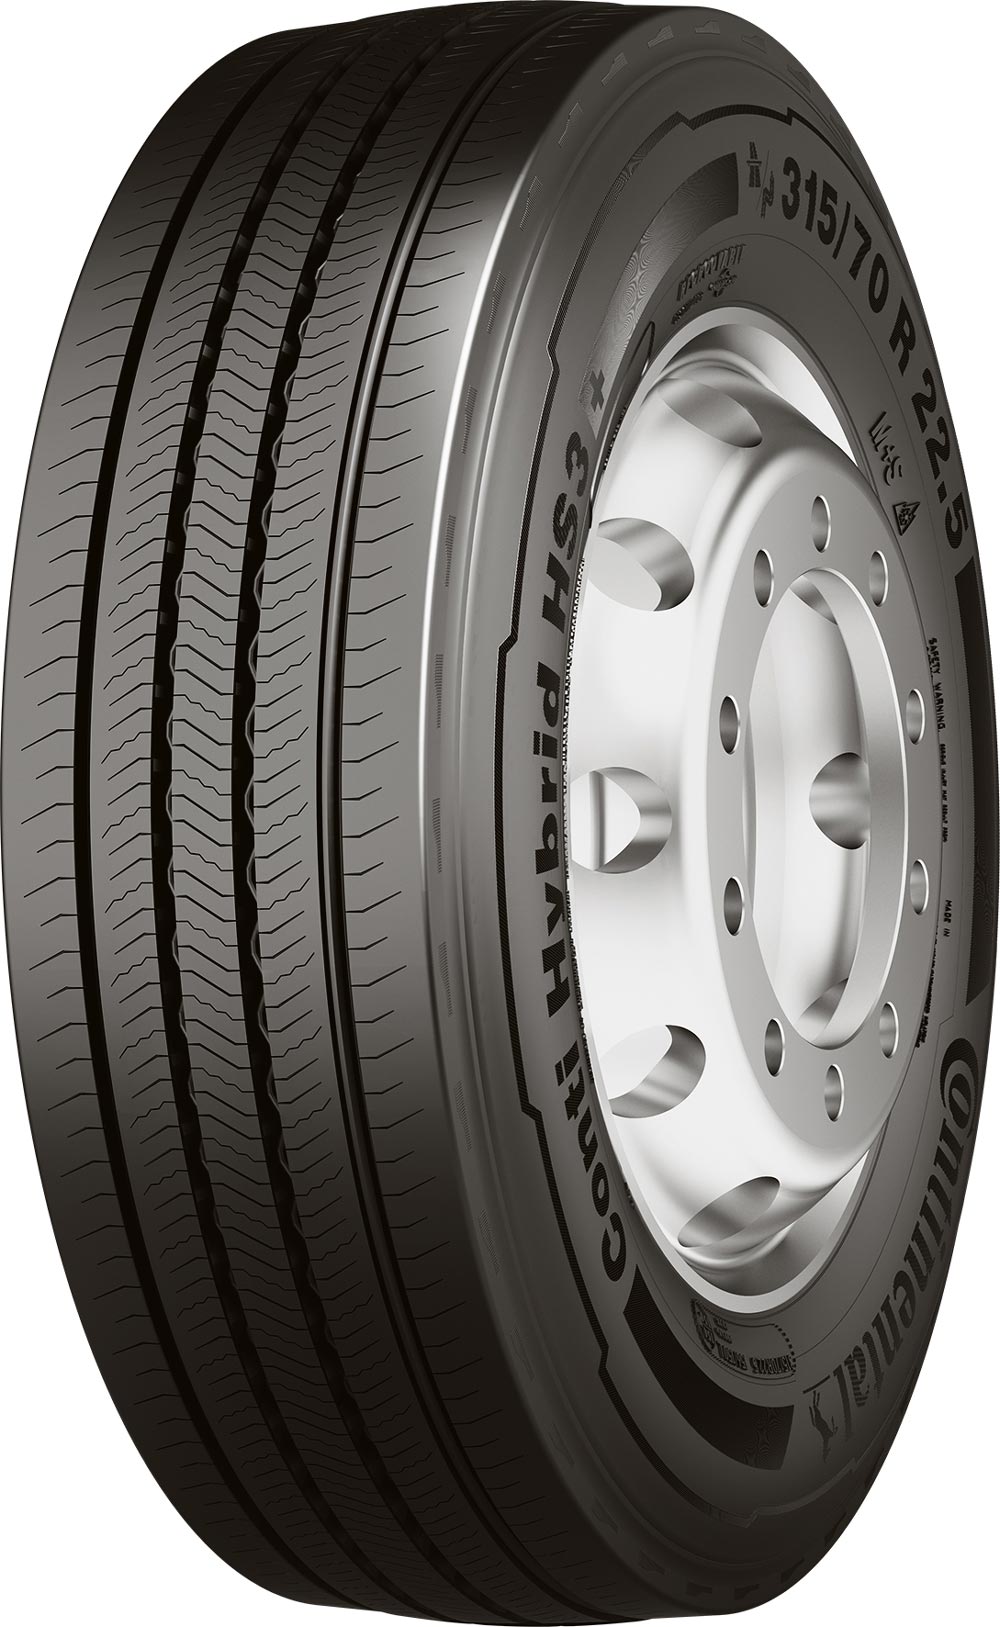 product_type-heavy_tires CONTINENTAL Conti Hybrid HS3+ 20PR 385/65 R22.5 K